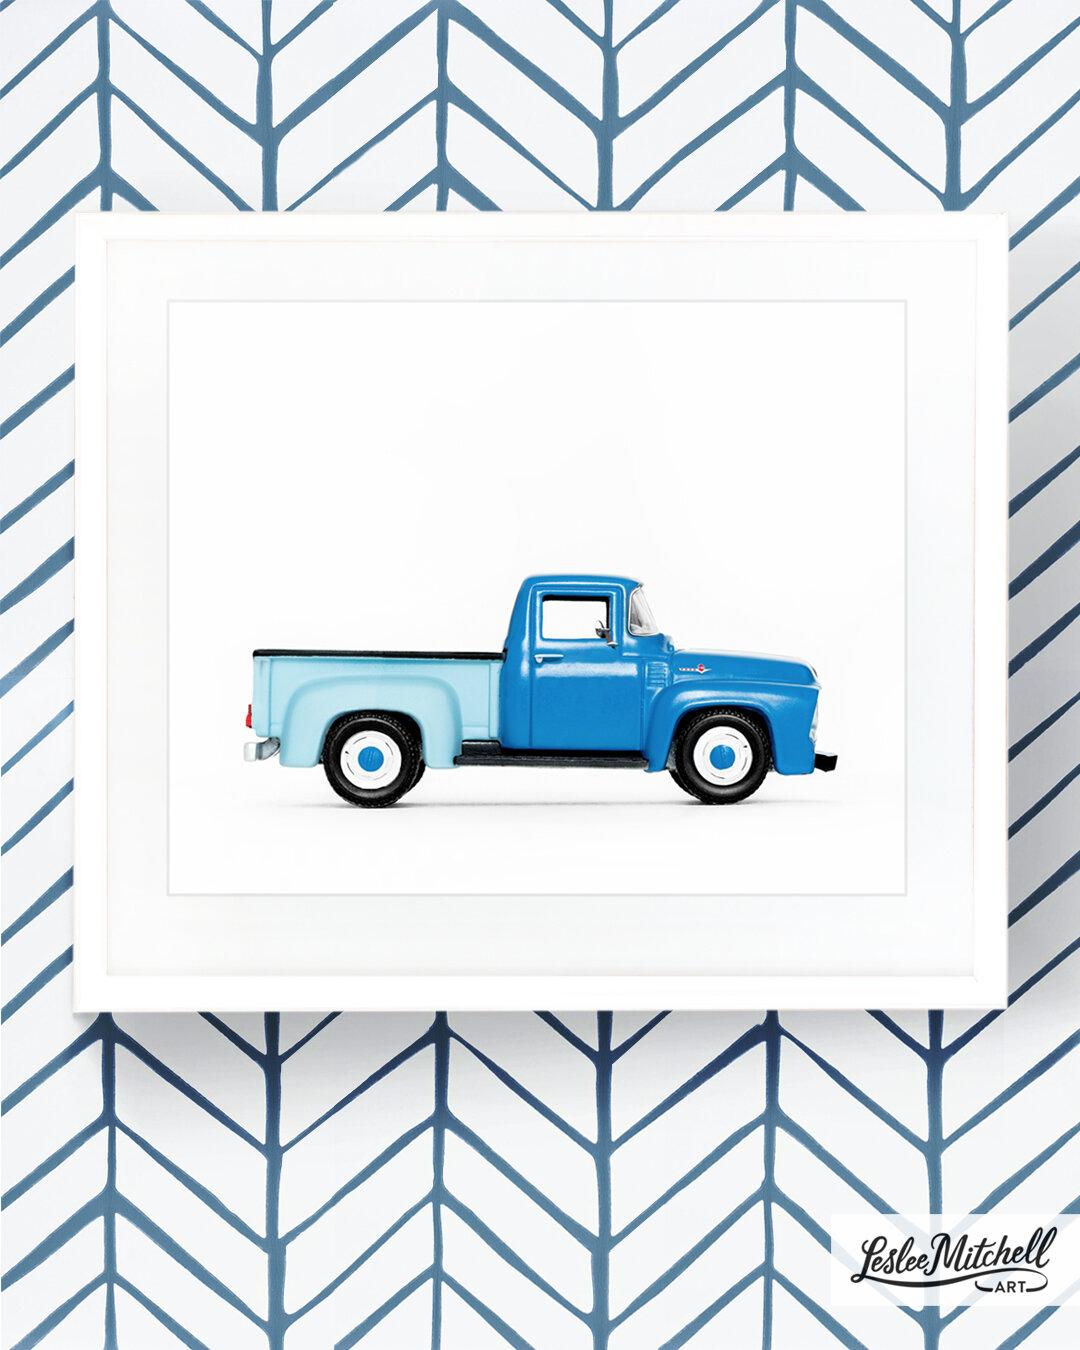 Car Series - Old Blue Truck